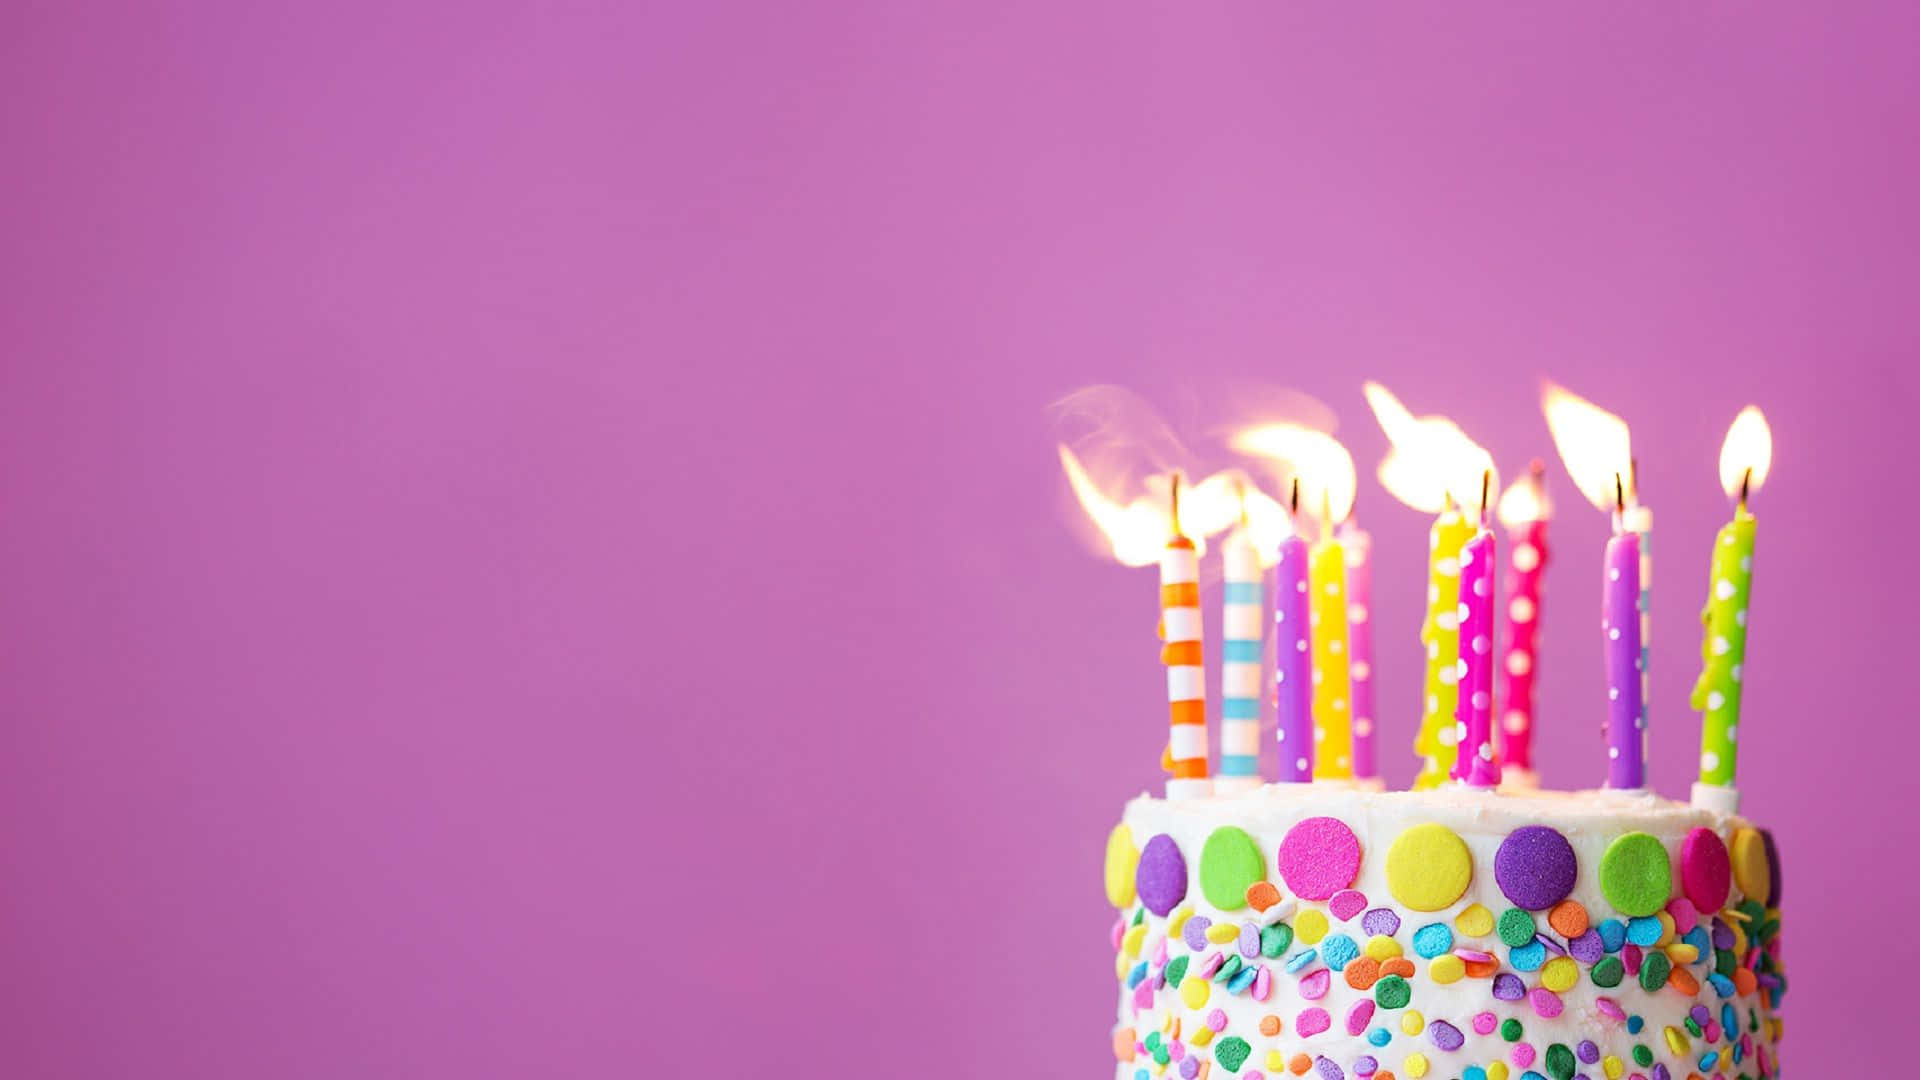 Colorful Mini Birthday Cake With Candles Background